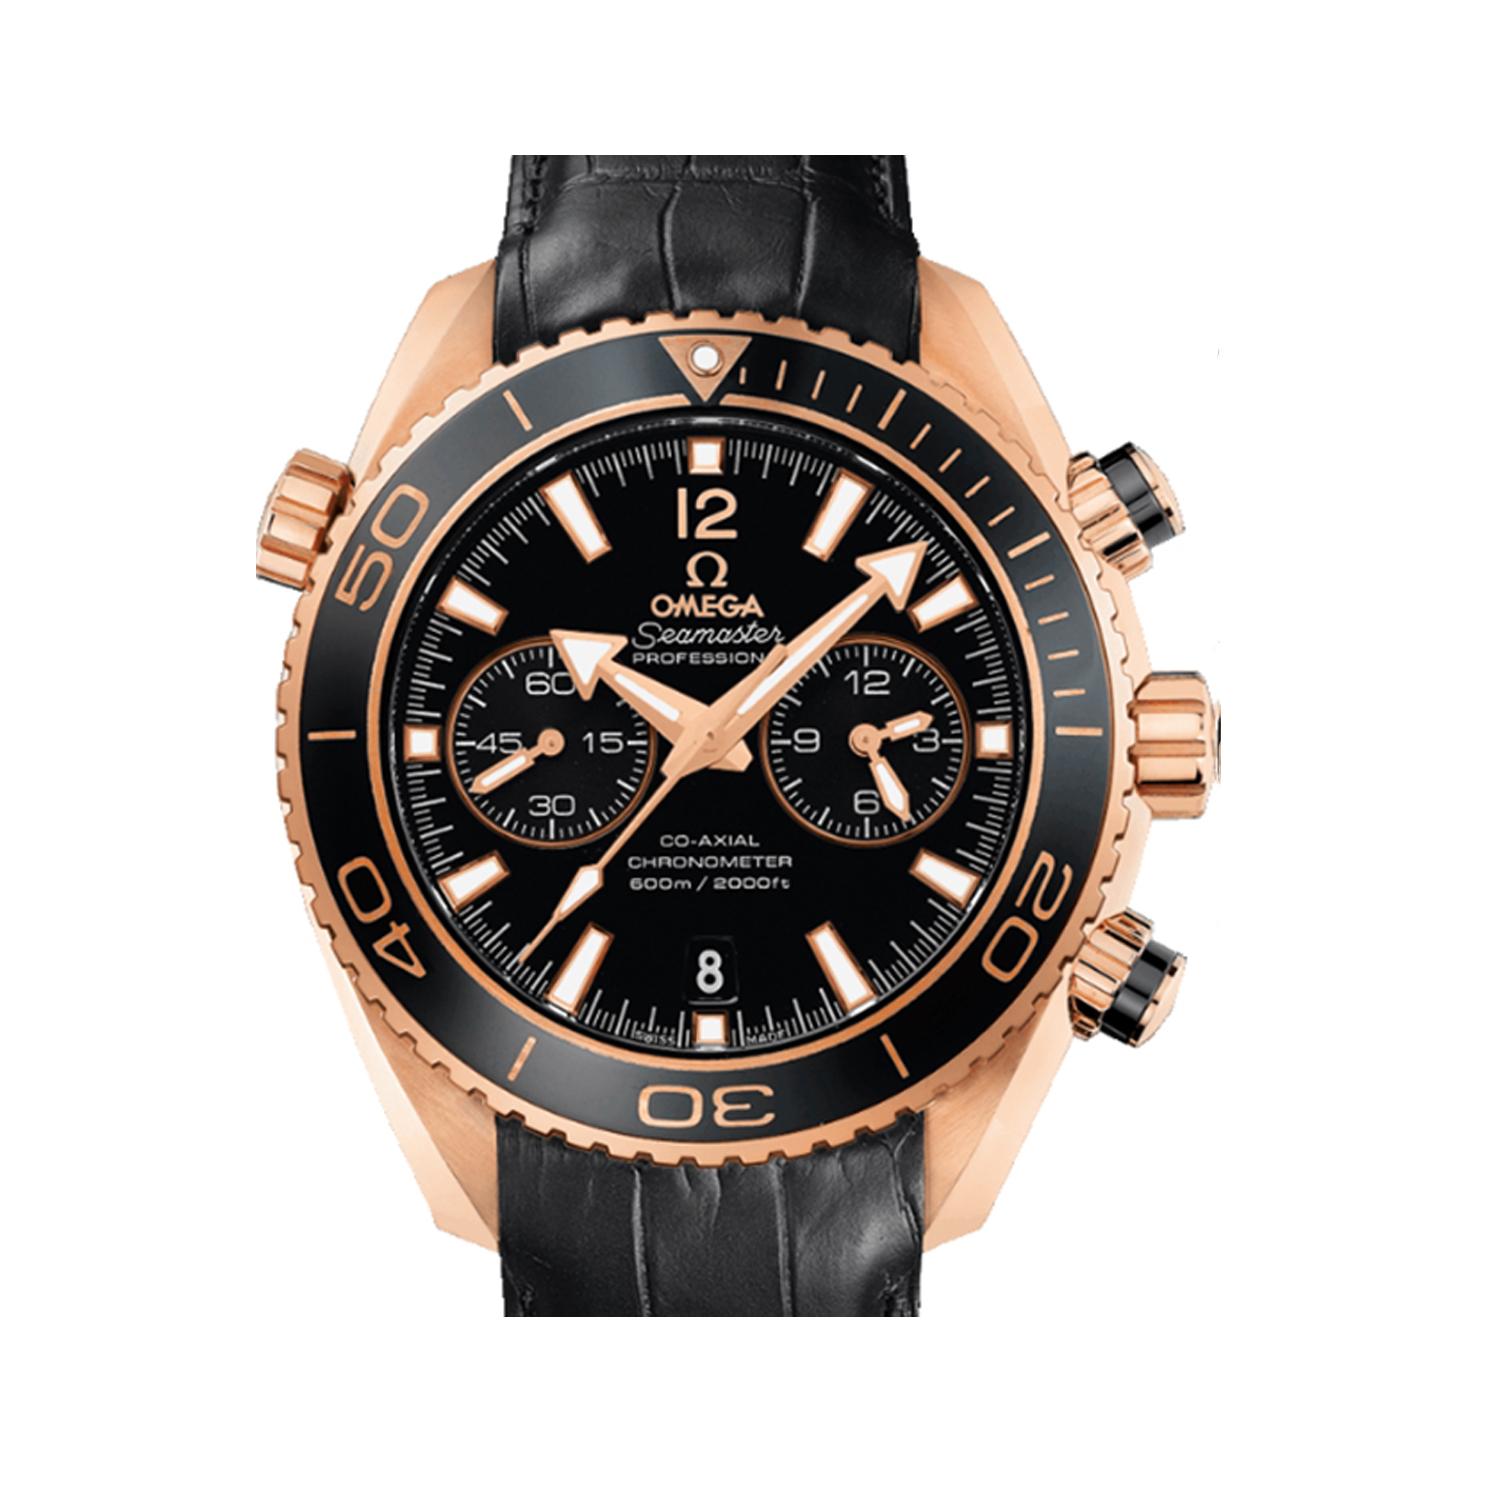 This brand new Omega Seamaster 232.63.46.51.01.001 is a beautiful men's timepiece that is powered by mechanical (automatic) movement which is cased in a rose gold case. It has a round shape face, chronograph, date indicator, small seconds subdial